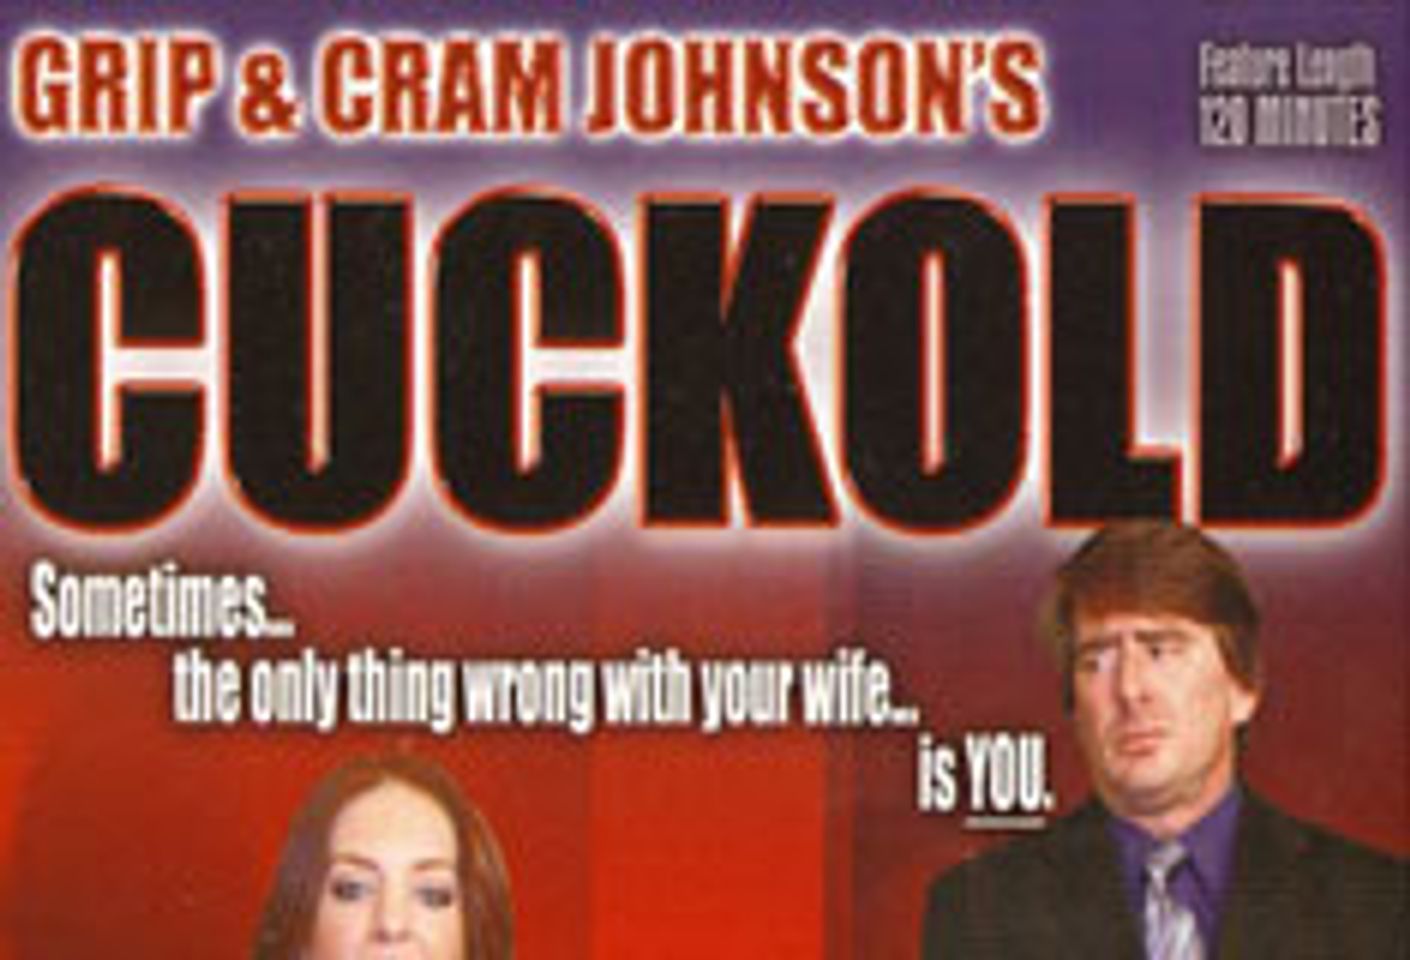 Chatsworth Pictures Releases <i>Cuckold</i>